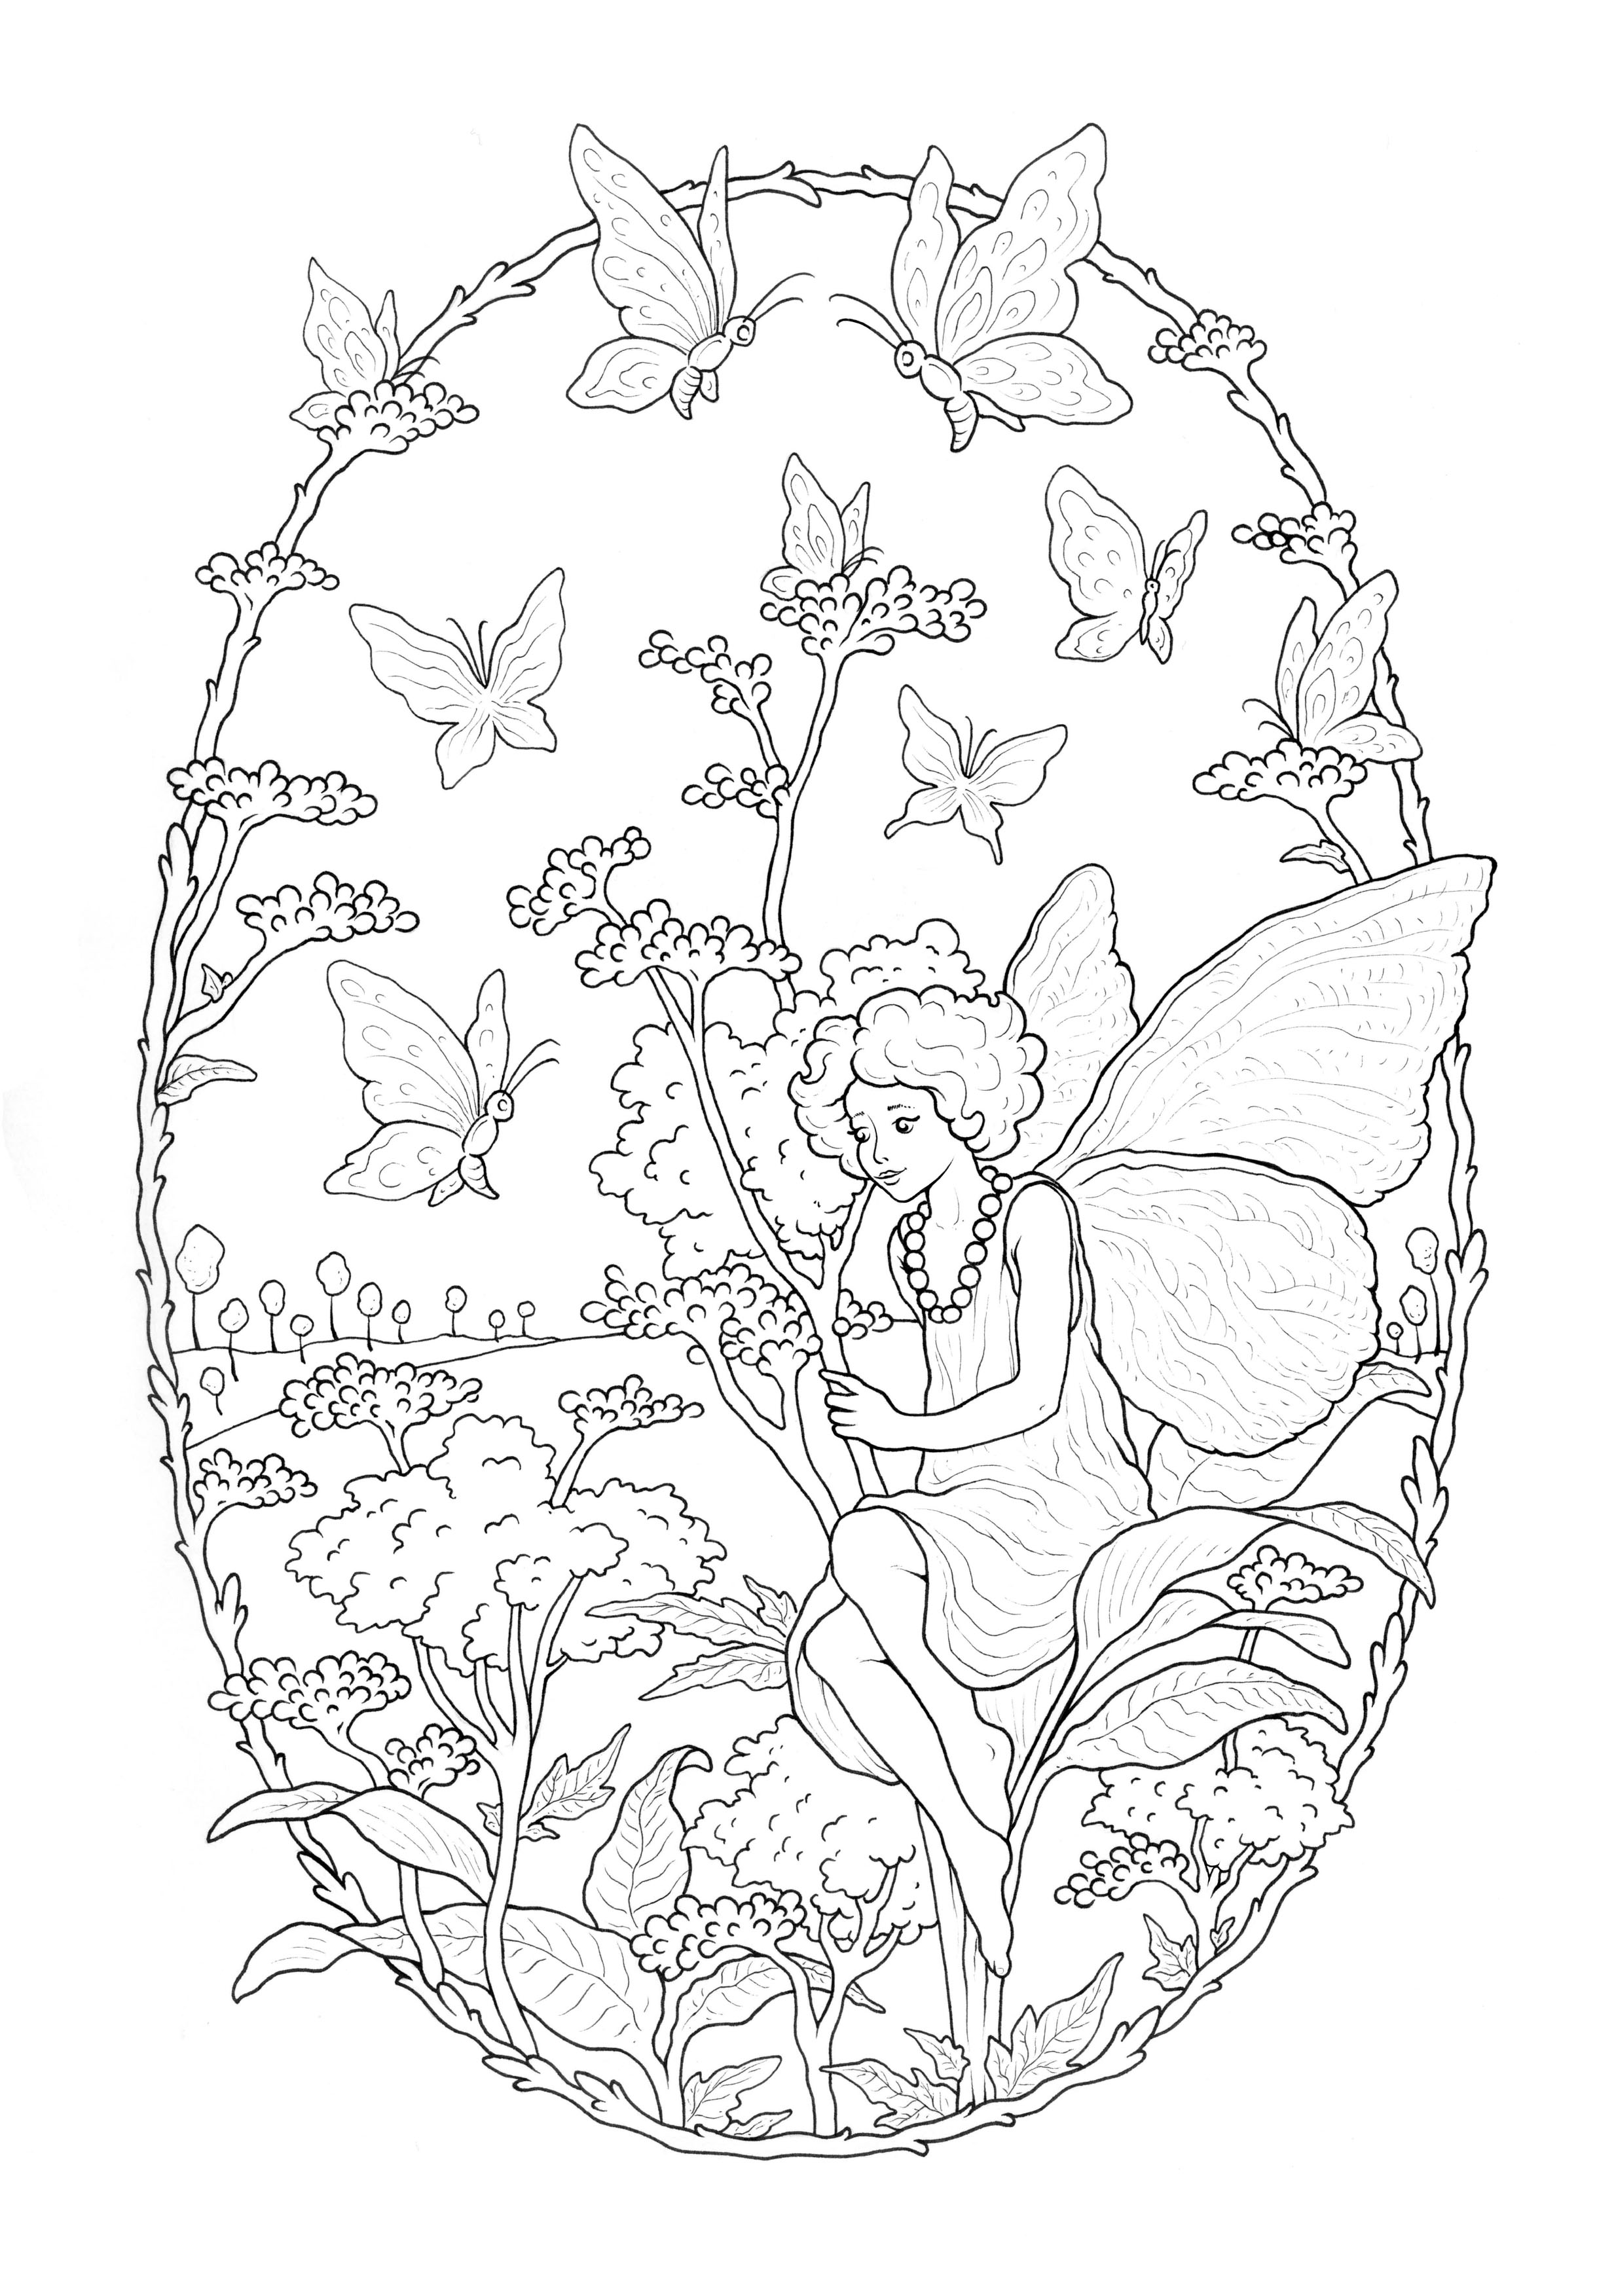 Download Fairy free to color for children - Fairy Kids Coloring Pages